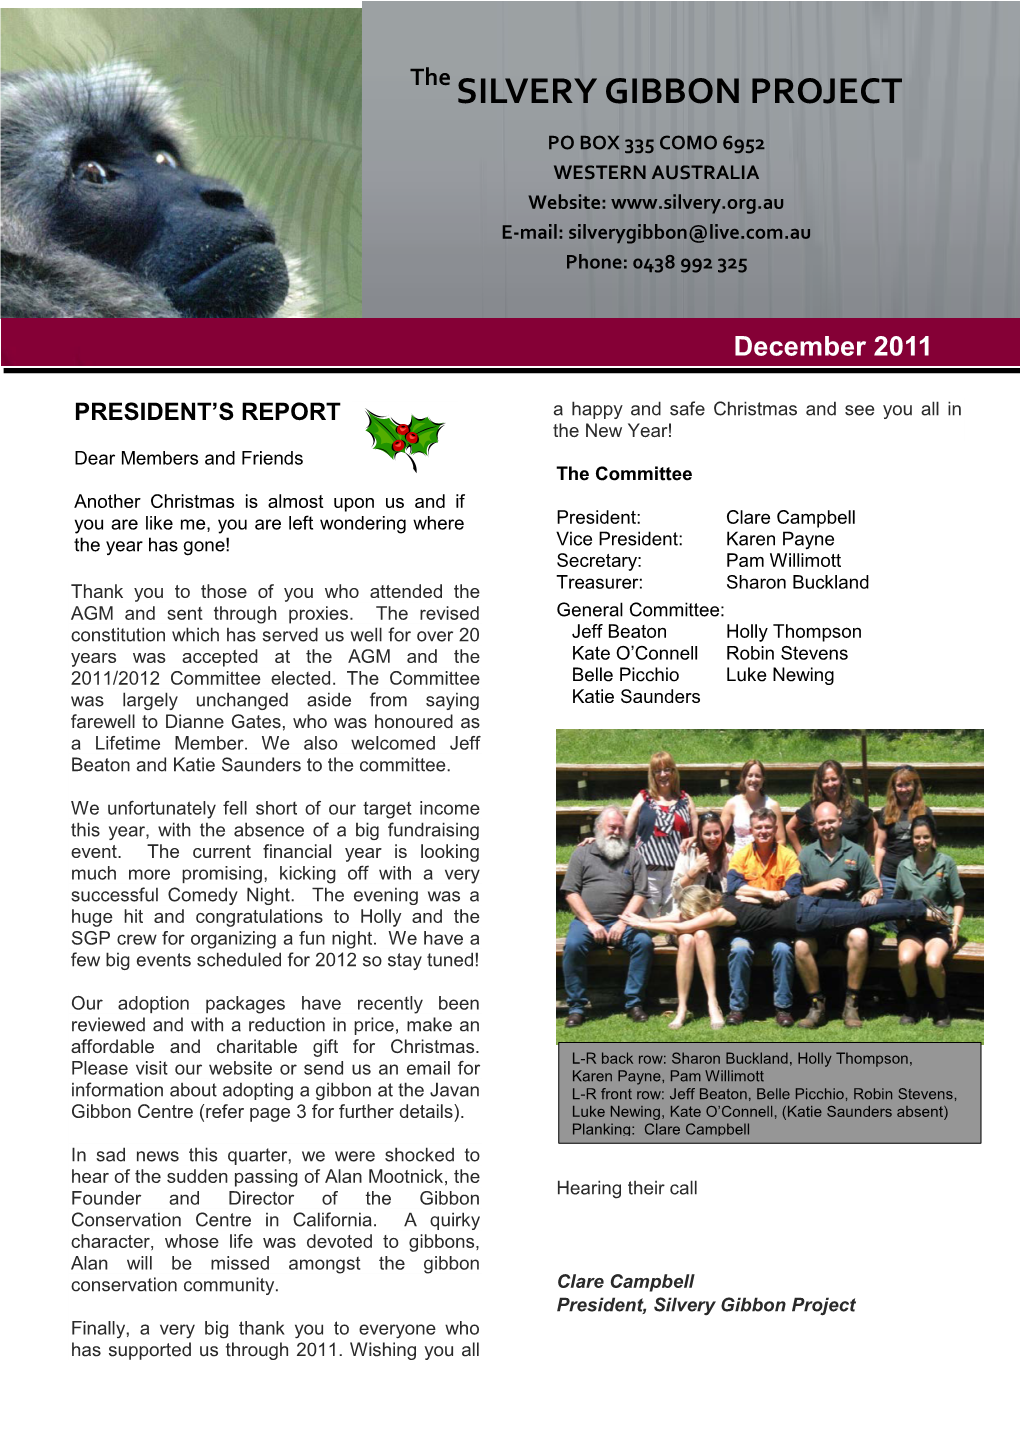 SILVERY GIBBON PROJECT Newsletterthe Page 1 December 2011 SILVERY GIBBON PROJECT